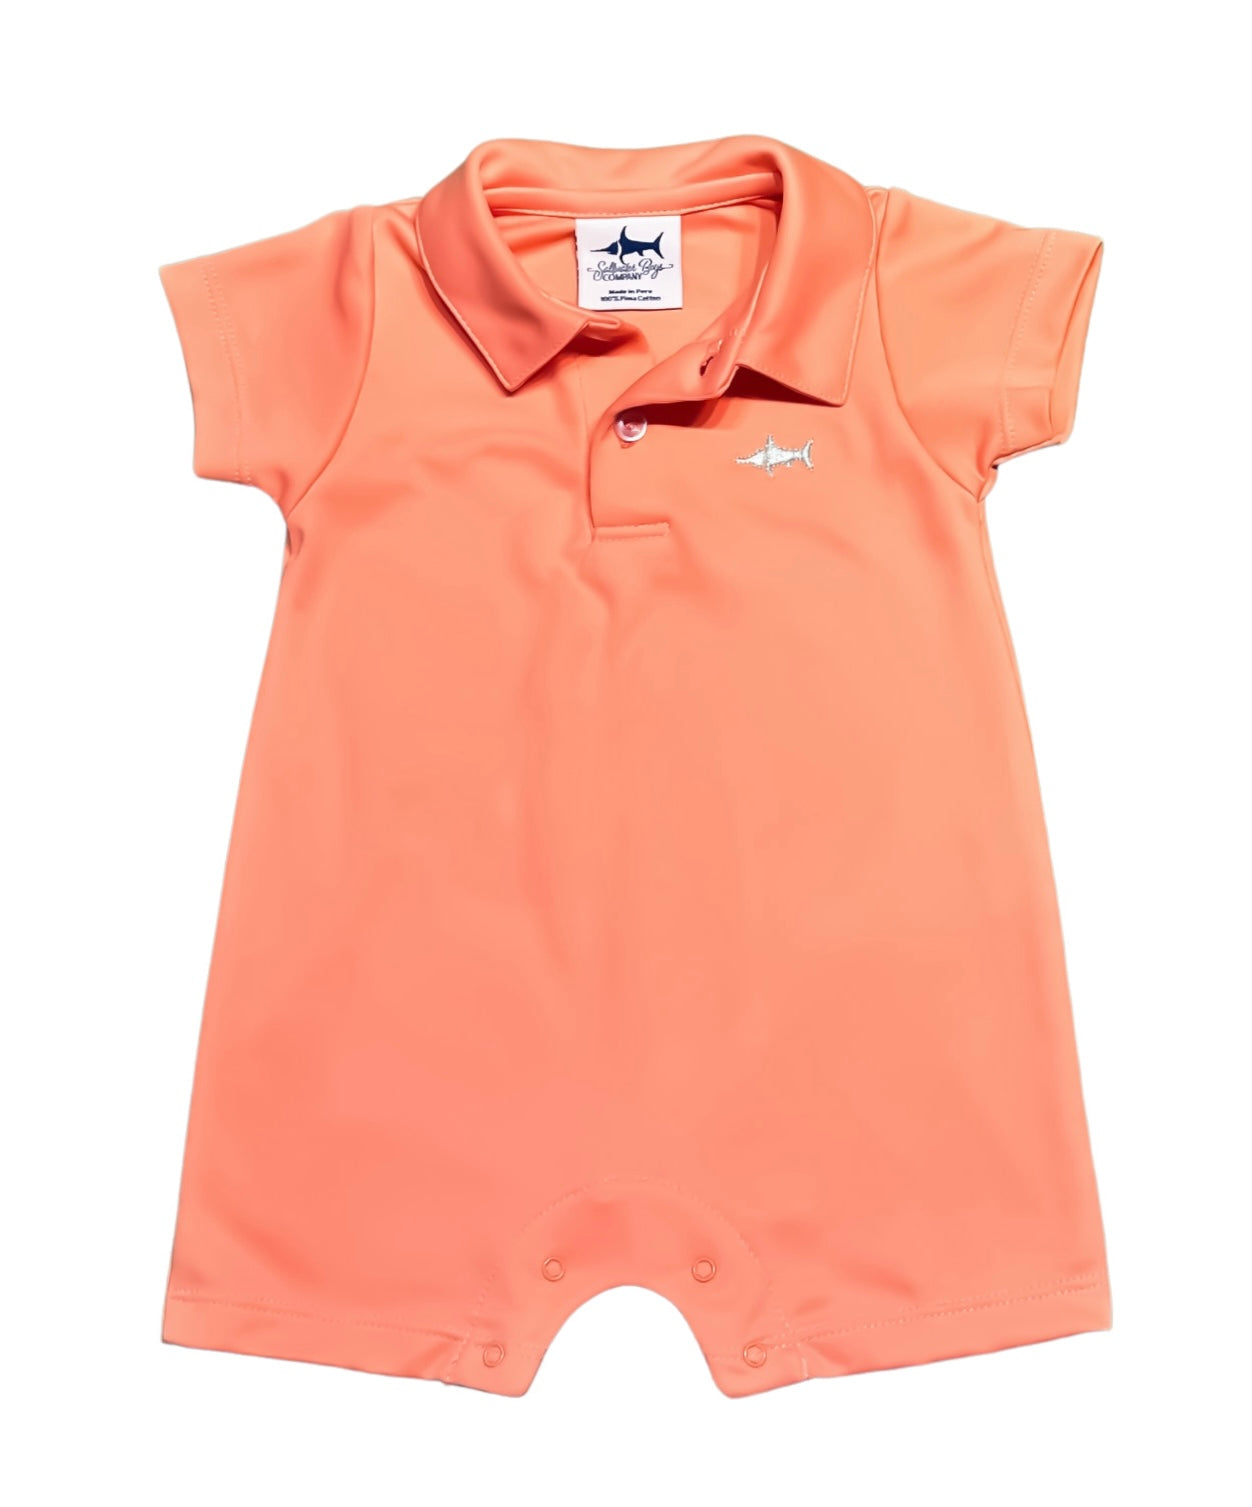 Saltwater Boys Signature Polo Short Romper - Coral